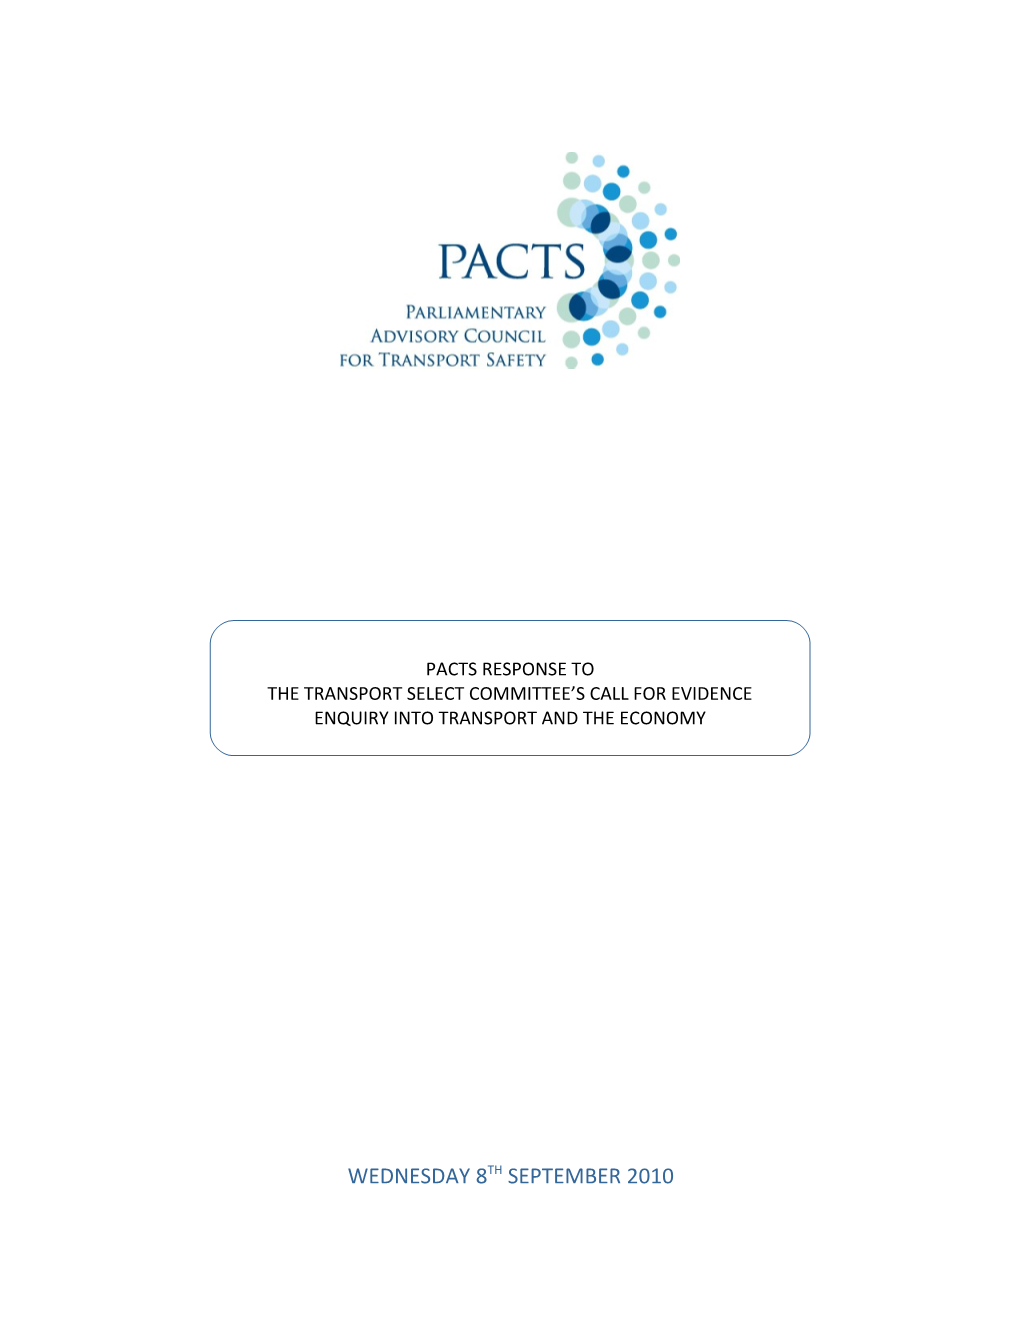 The Parliamentary Advisory Council for Transport Safety (Pacts)